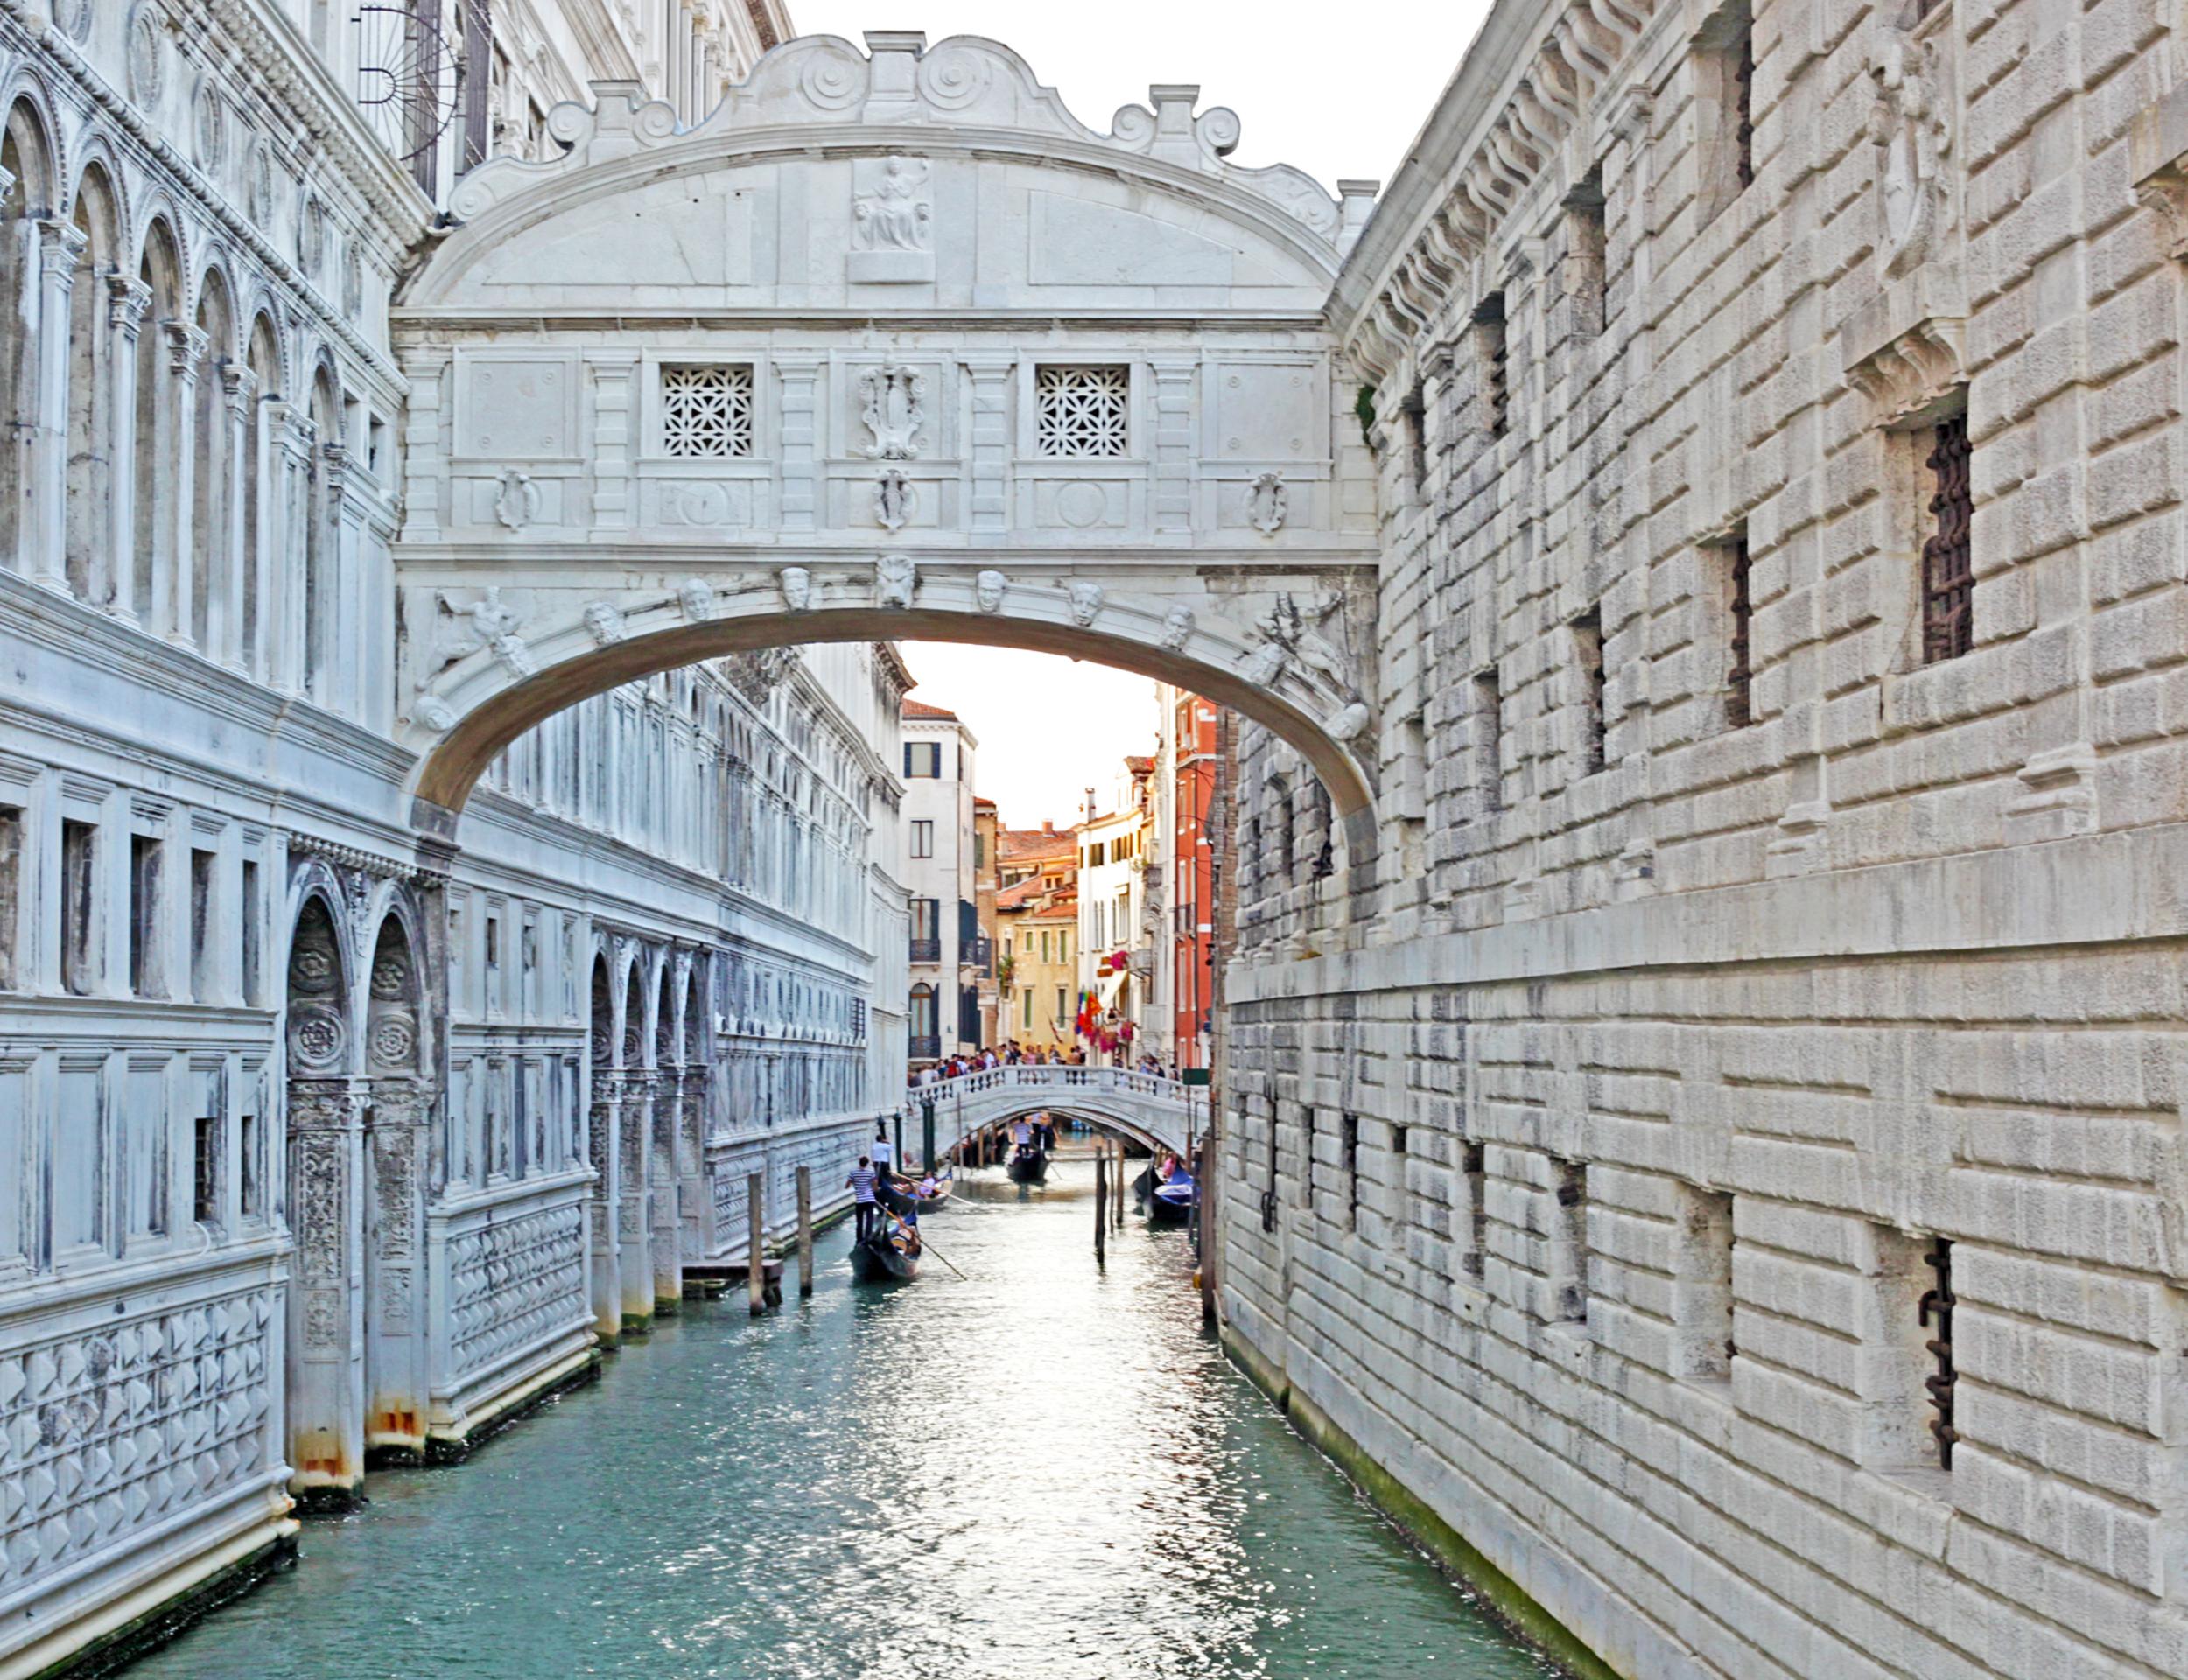 Guided Walking Tour of Venice + Skip-the-line Ticket for St Mark's Basilica + Gondola Tour